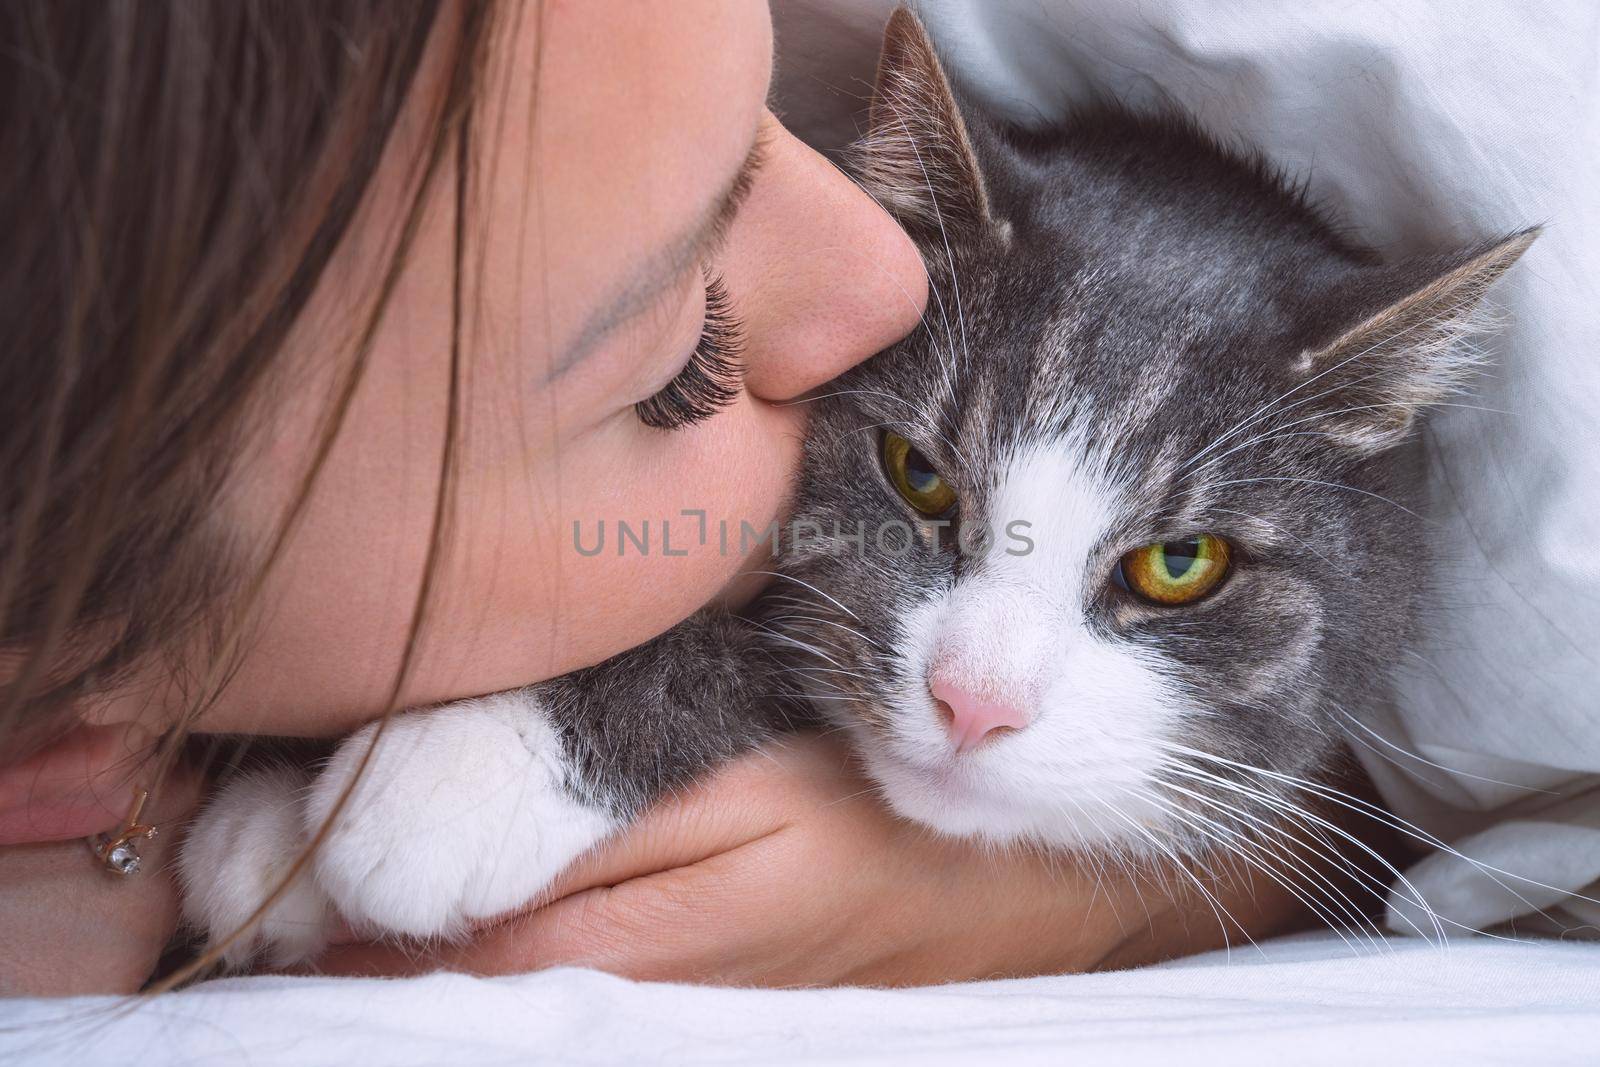 Beautiful woman kissing funny grumpy cat. People and pets love and friendship. Cat and owner together. Cat lover. High quality photo